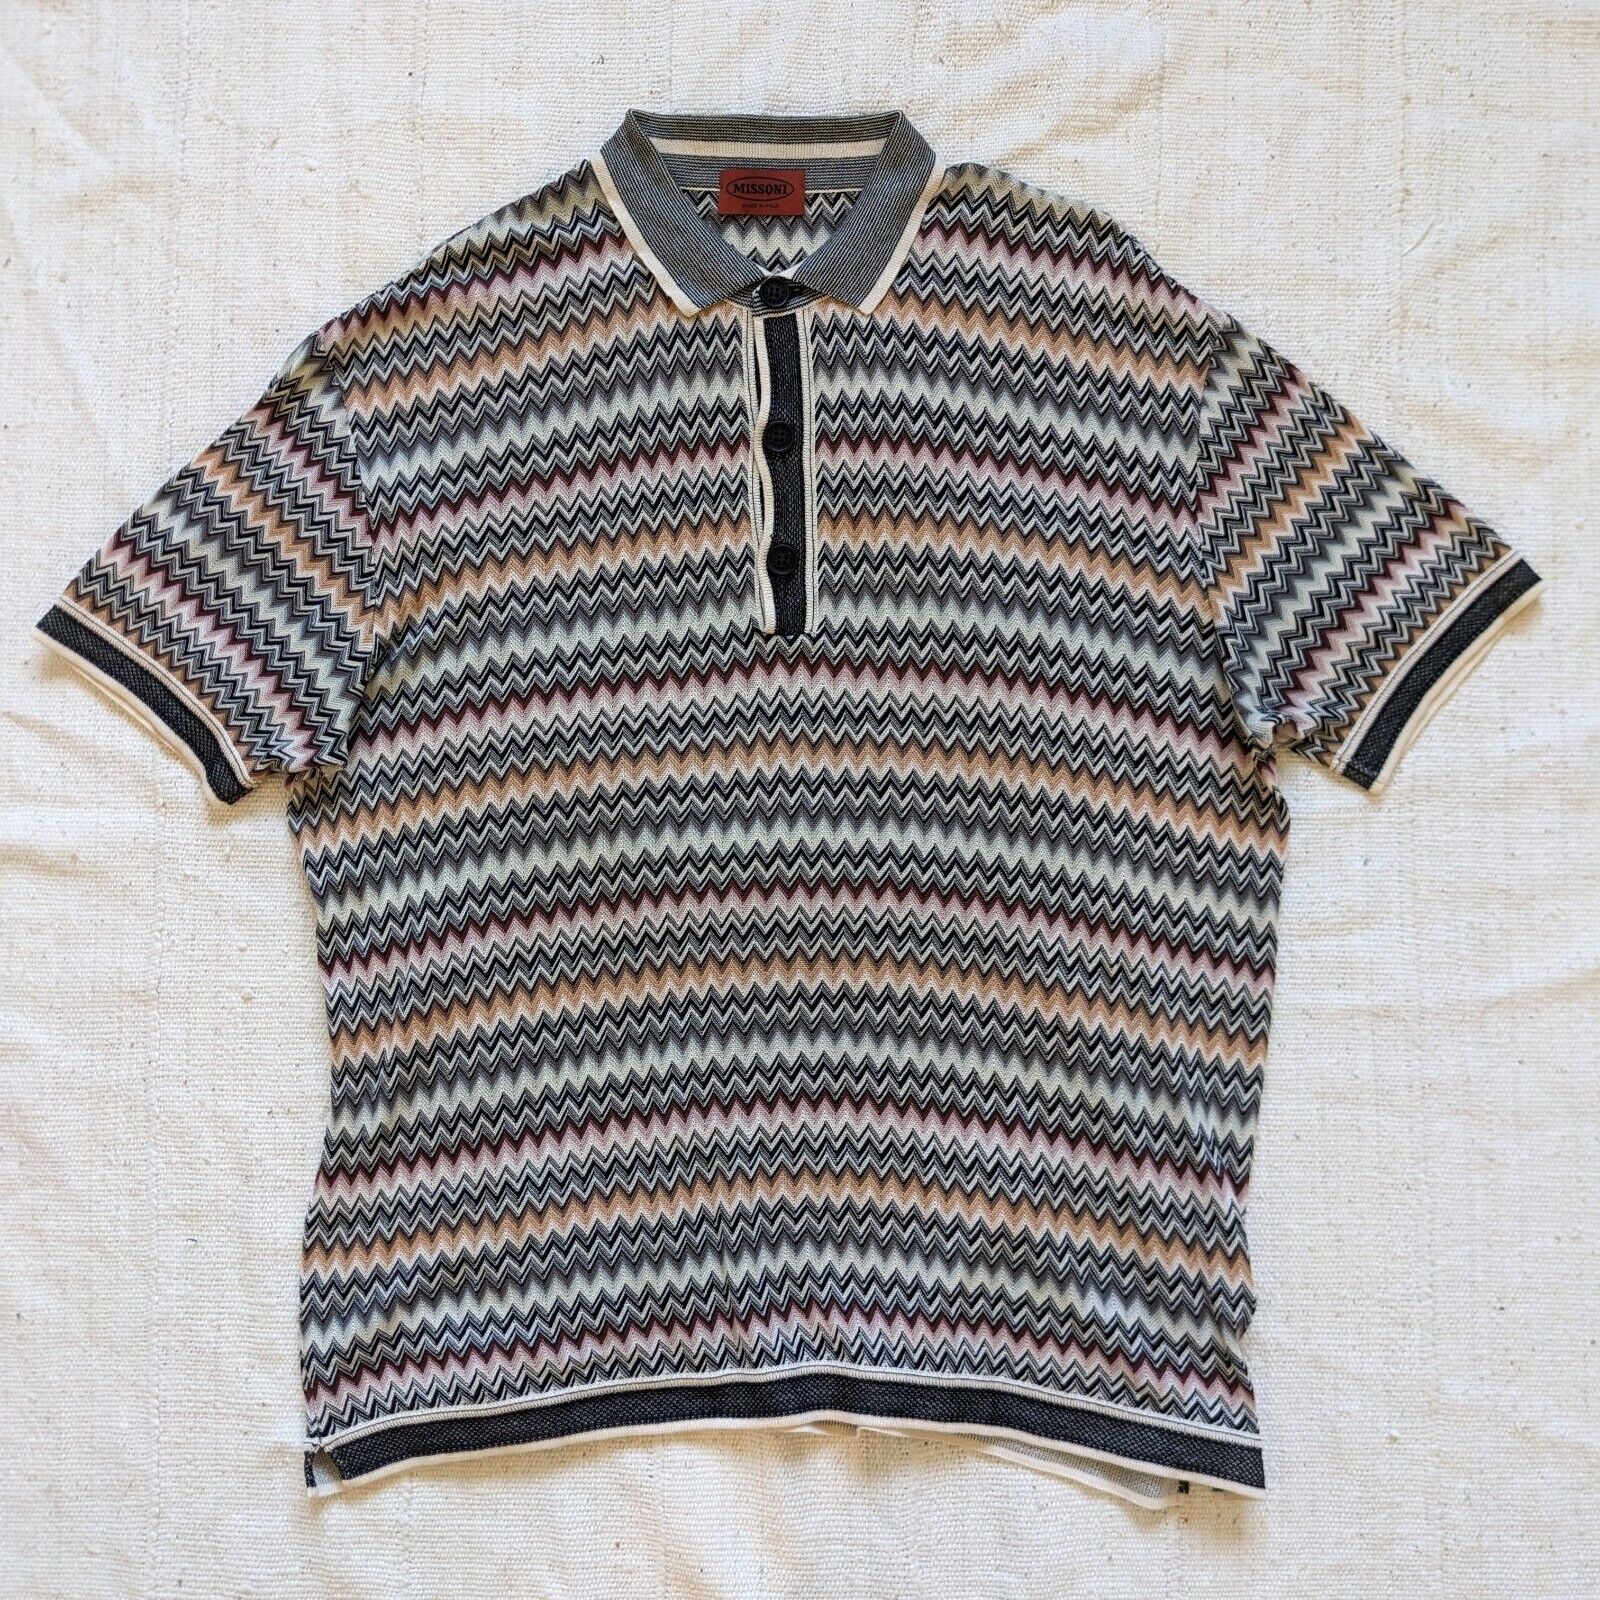 Missoni Knit Polo Shirt 54 XL Red Gray Yellow Zigzag Wave Striped Vintage 90s